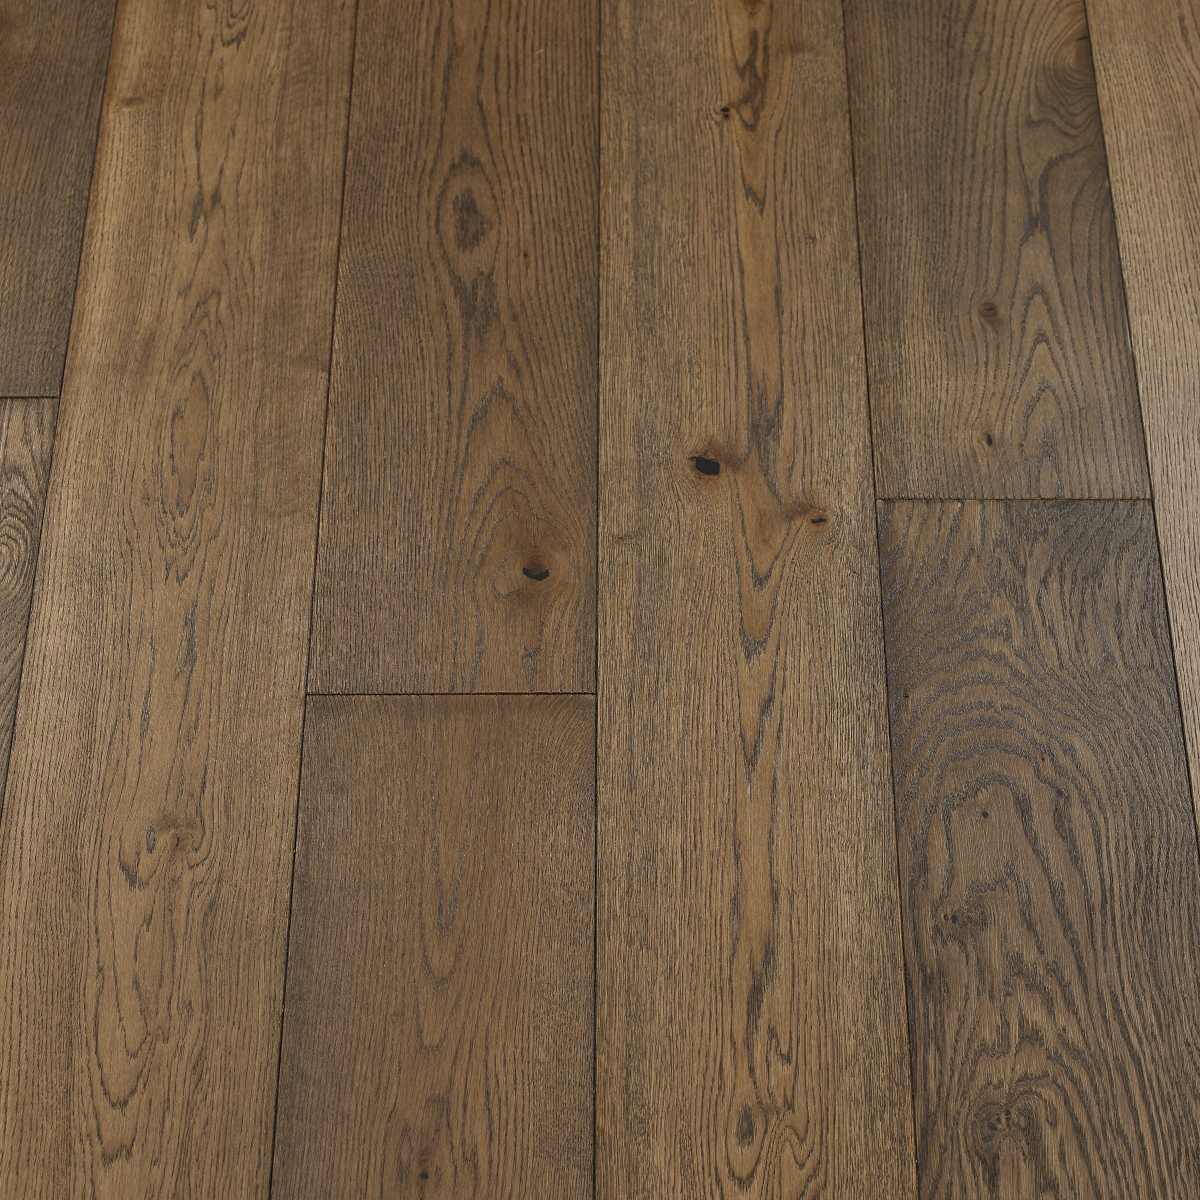 Classic Mocha Wood Flooring - image featuring a warm and inviting mocha-coloured wood flooring with rich tones and a smooth finish.